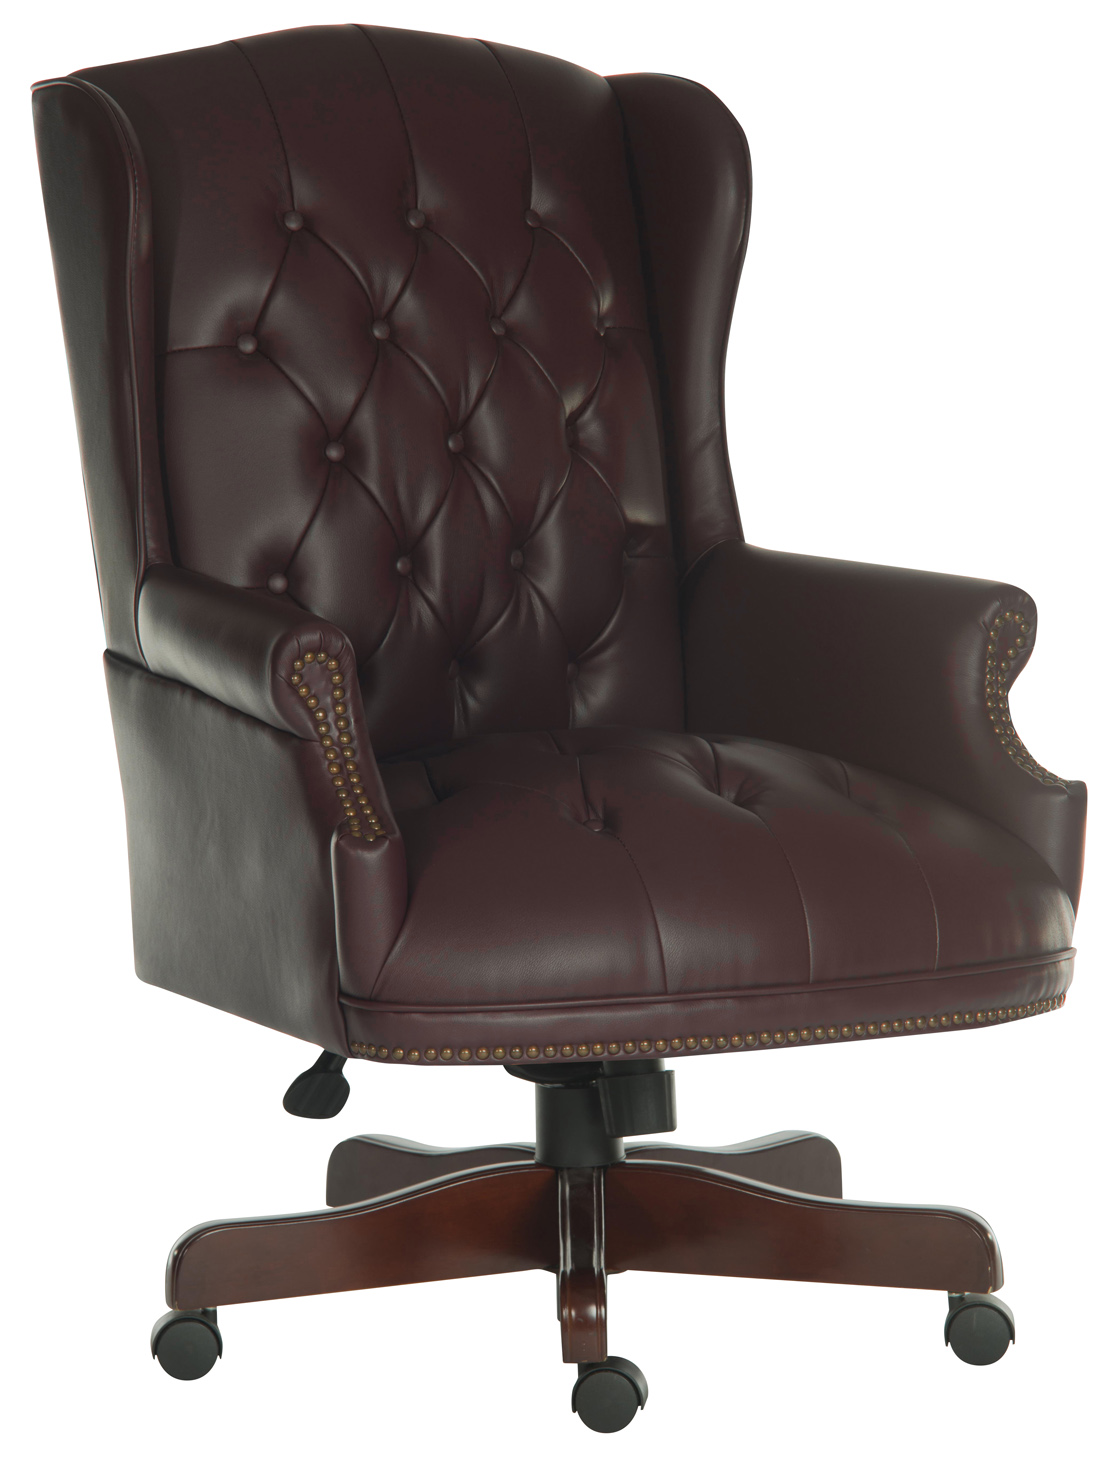 Chairman Antique Style Bonded Leather Faced Executive Office Chair Burgundy B800